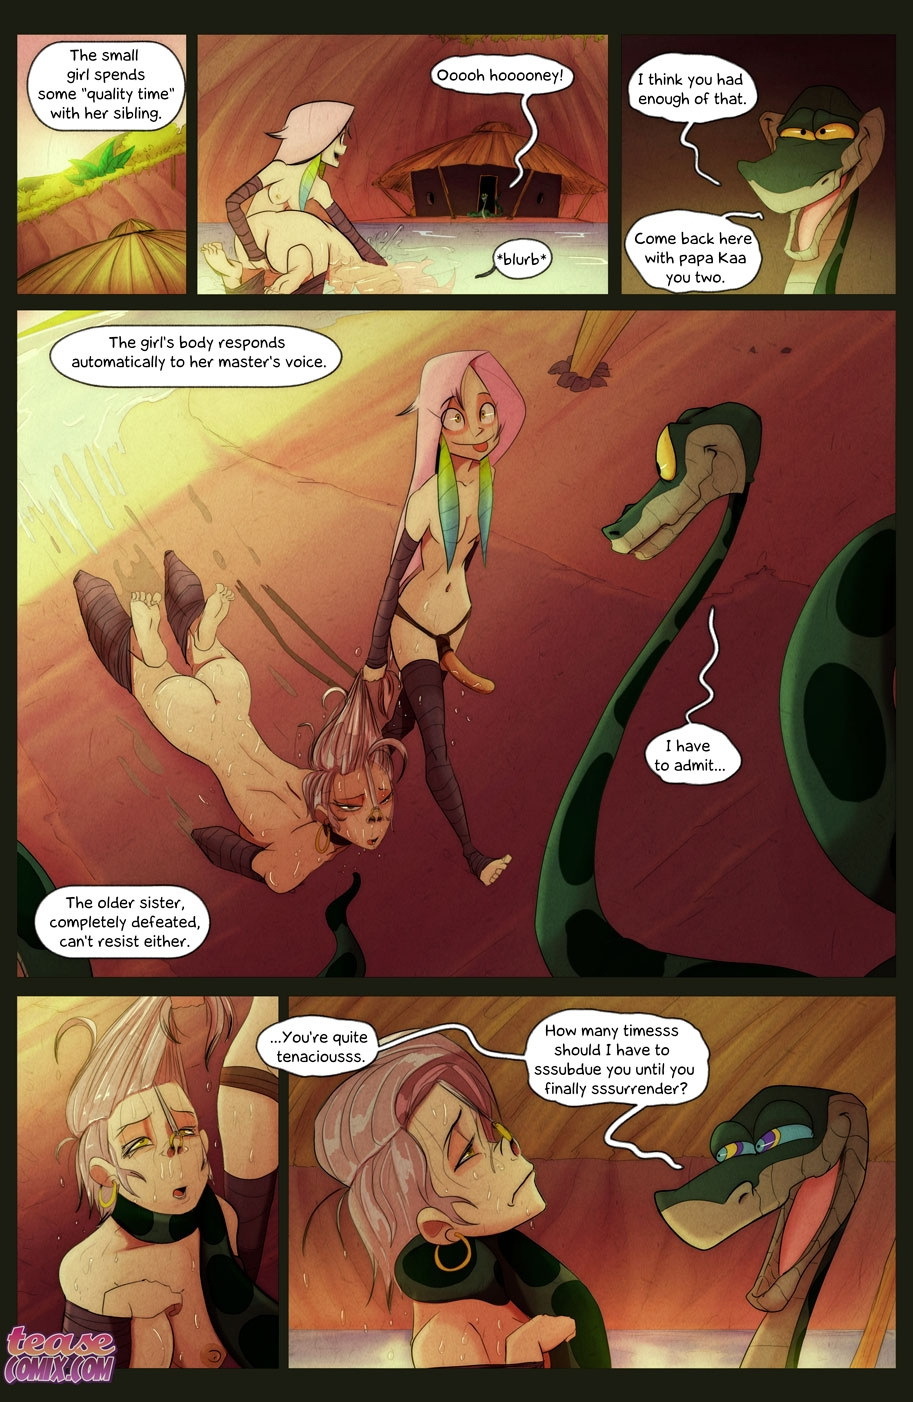 The Snake and The Girl 5 - Page 4